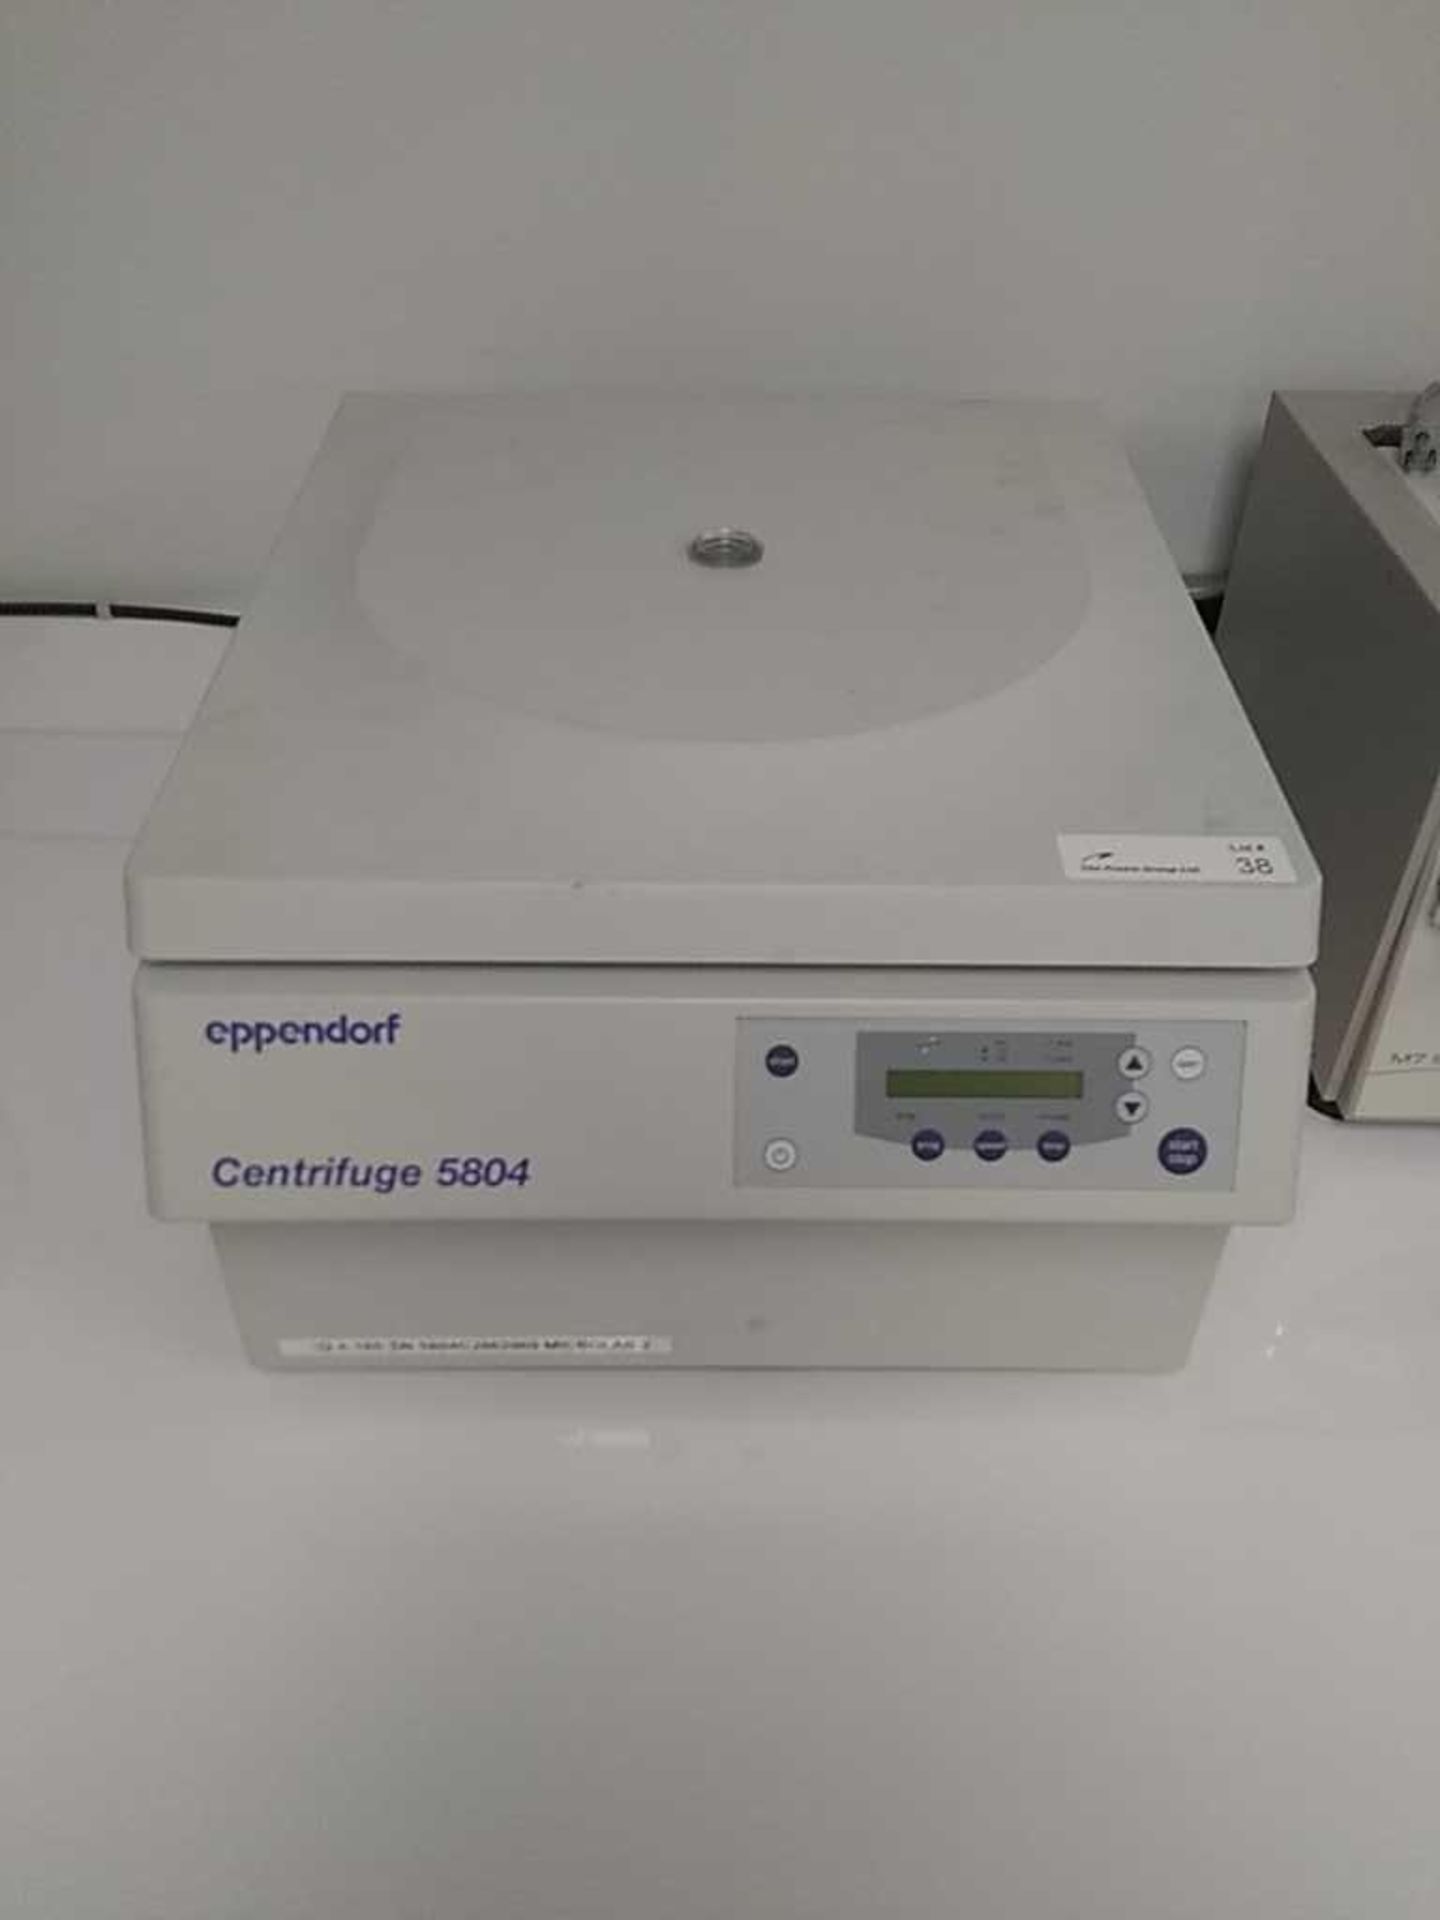 Eppendorf 5804 Benchtop Centrifuge With Rotor - Image 5 of 7